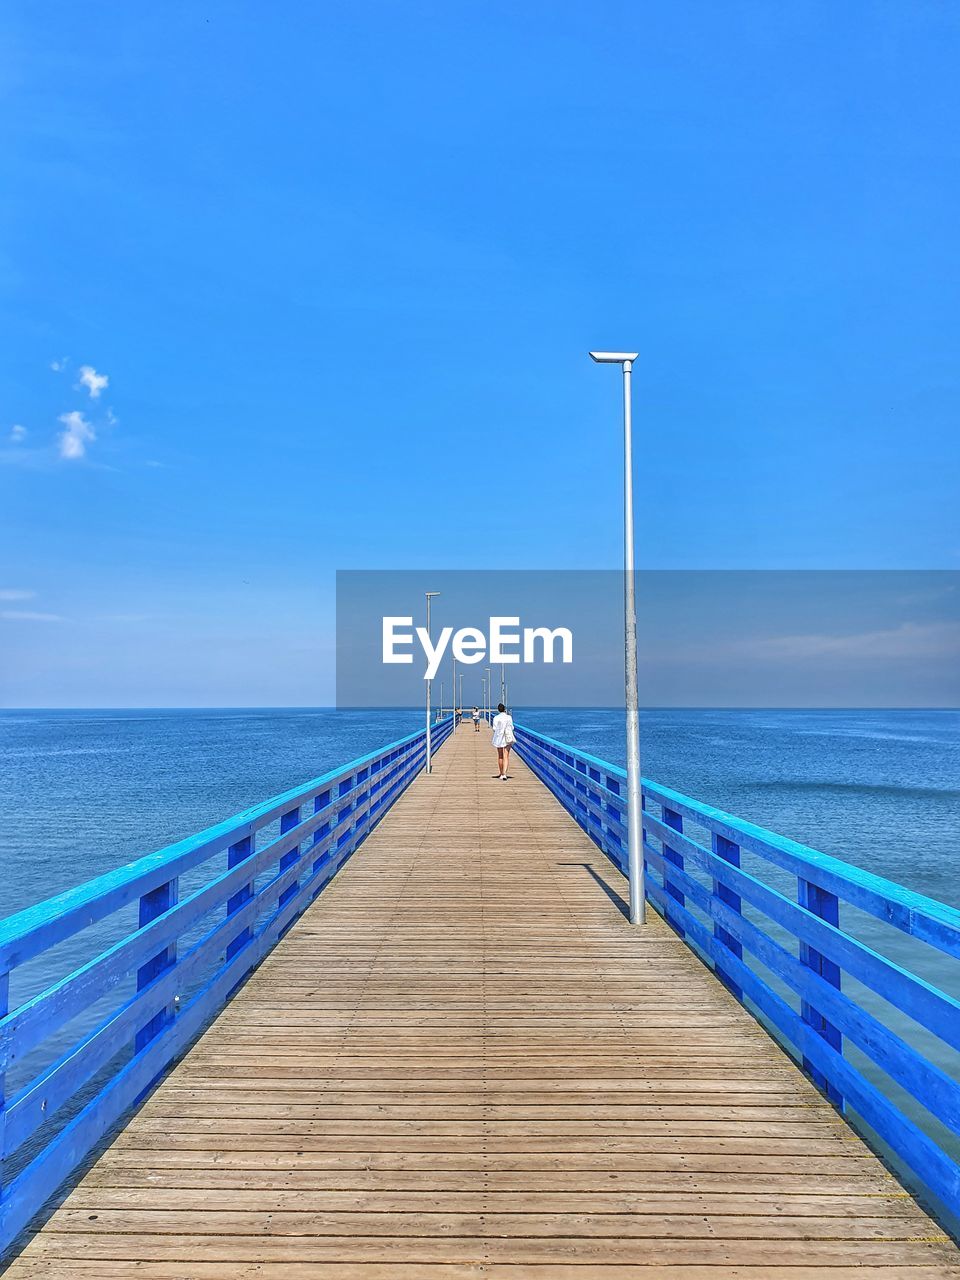 VIEW OF PIER OVER SEA AGAINST BLUE SKY